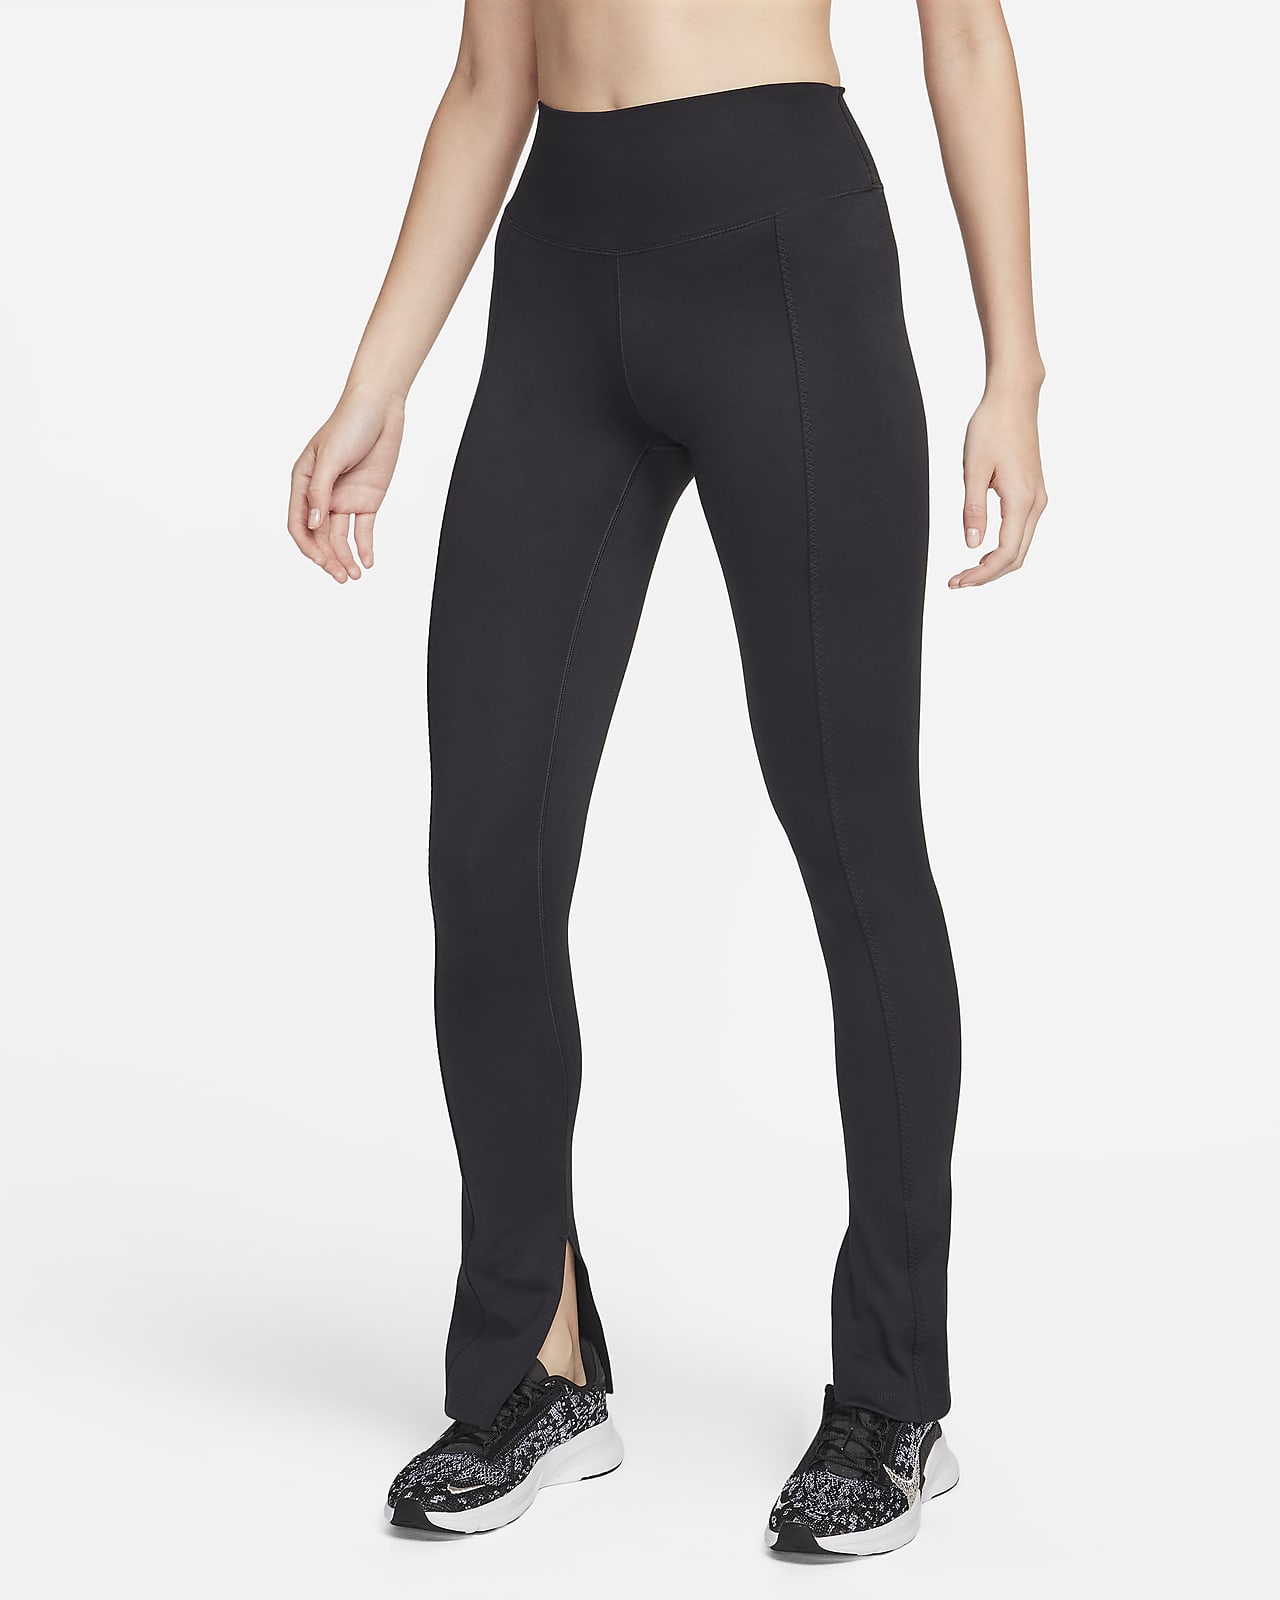 Nike Training one tight leggings in black and gold